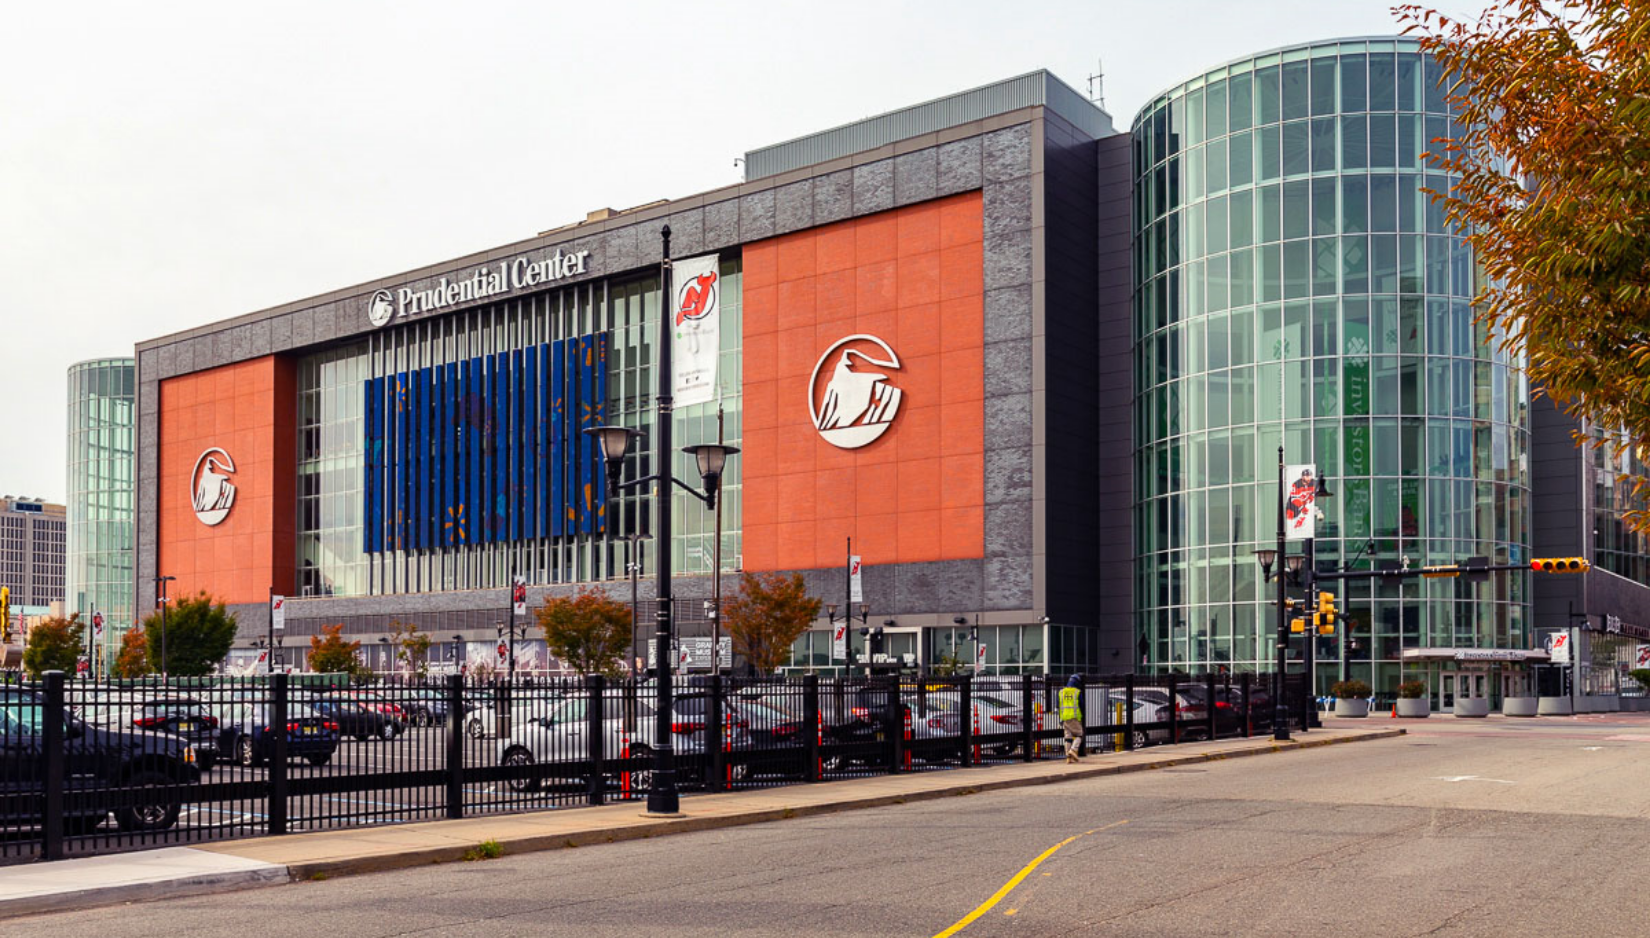 Exterior and parking lot of Prudential Center